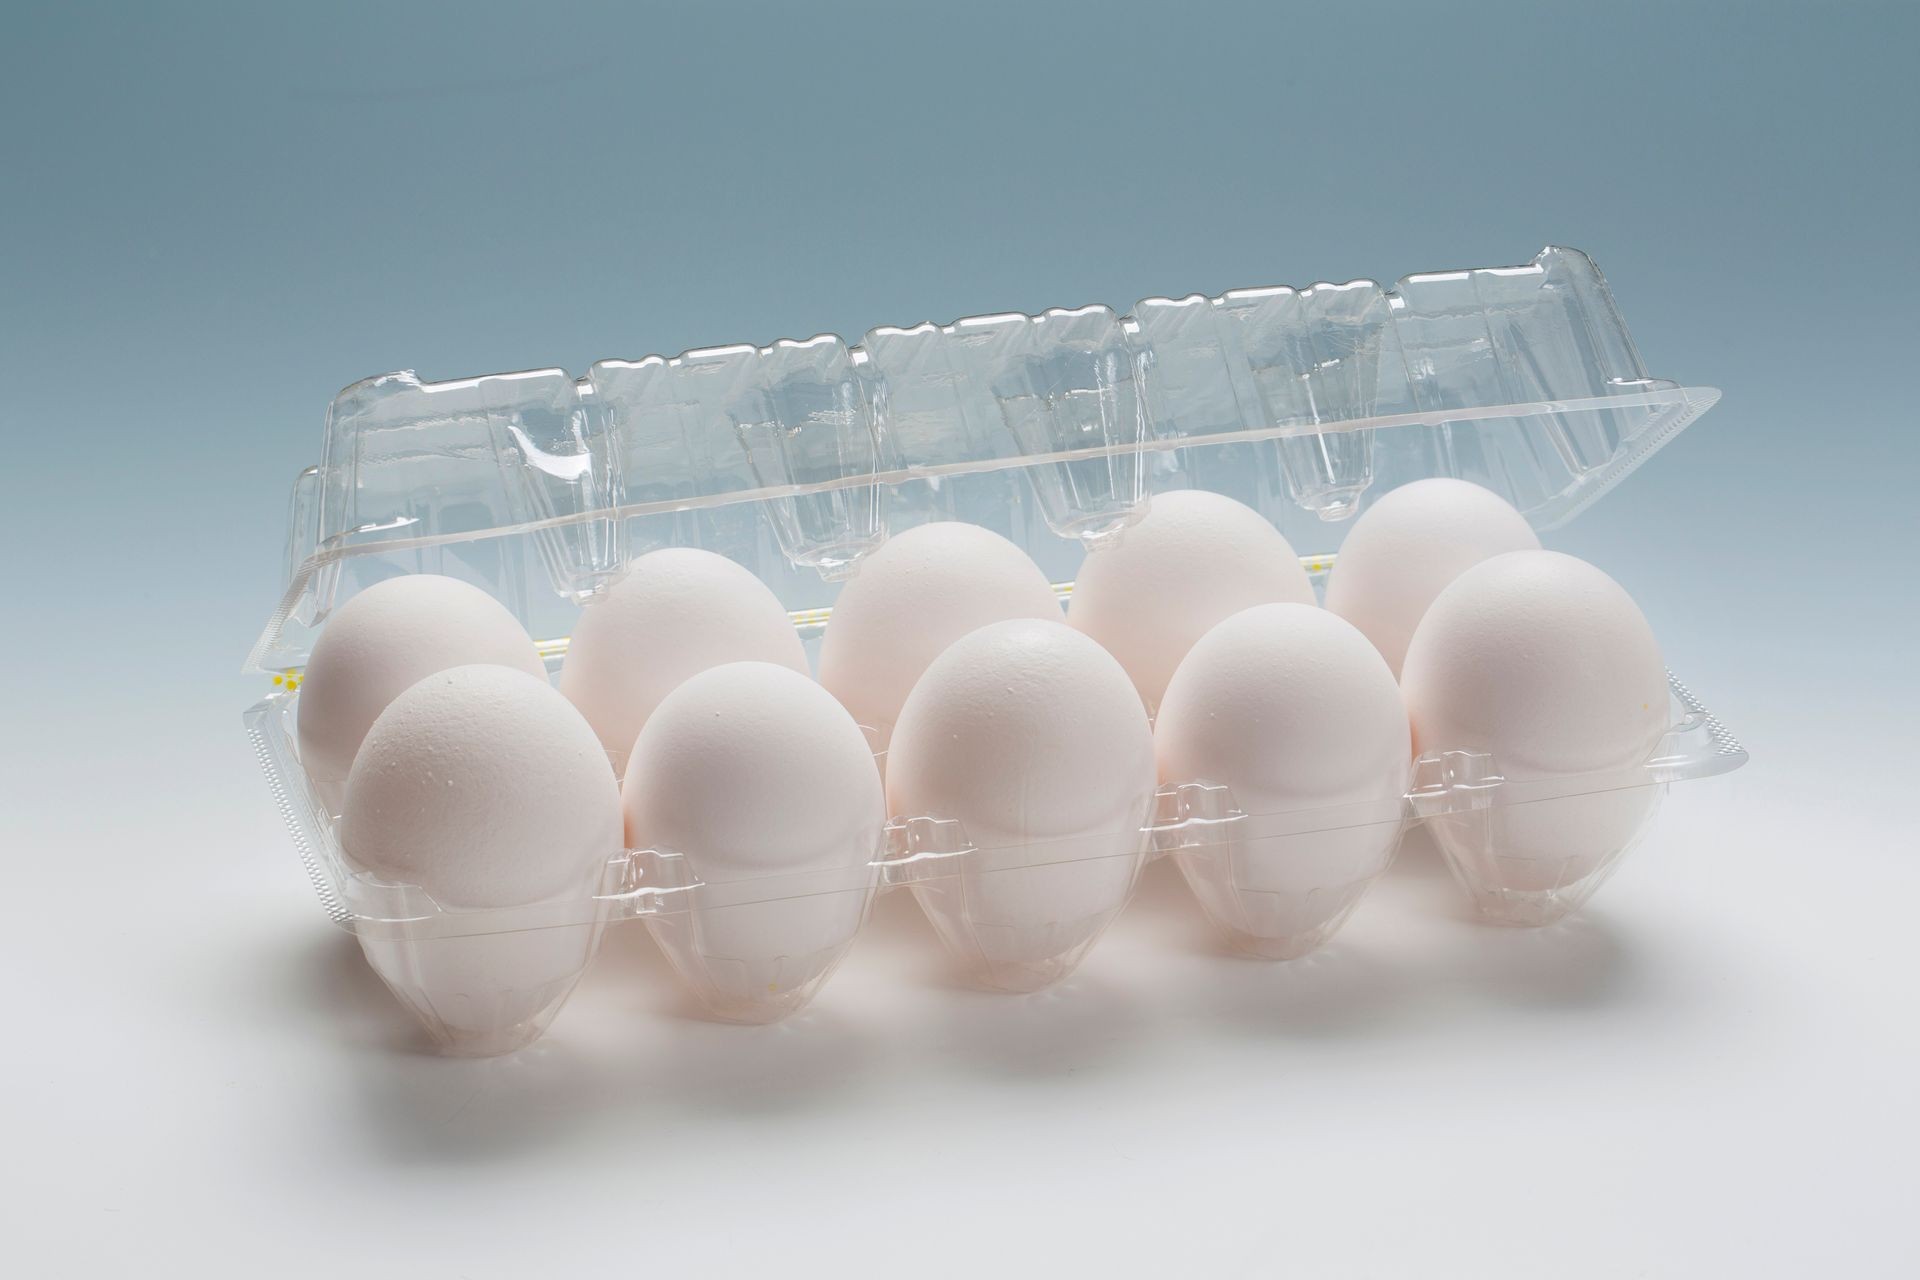 Eggs in a plastic package with isolated white background.